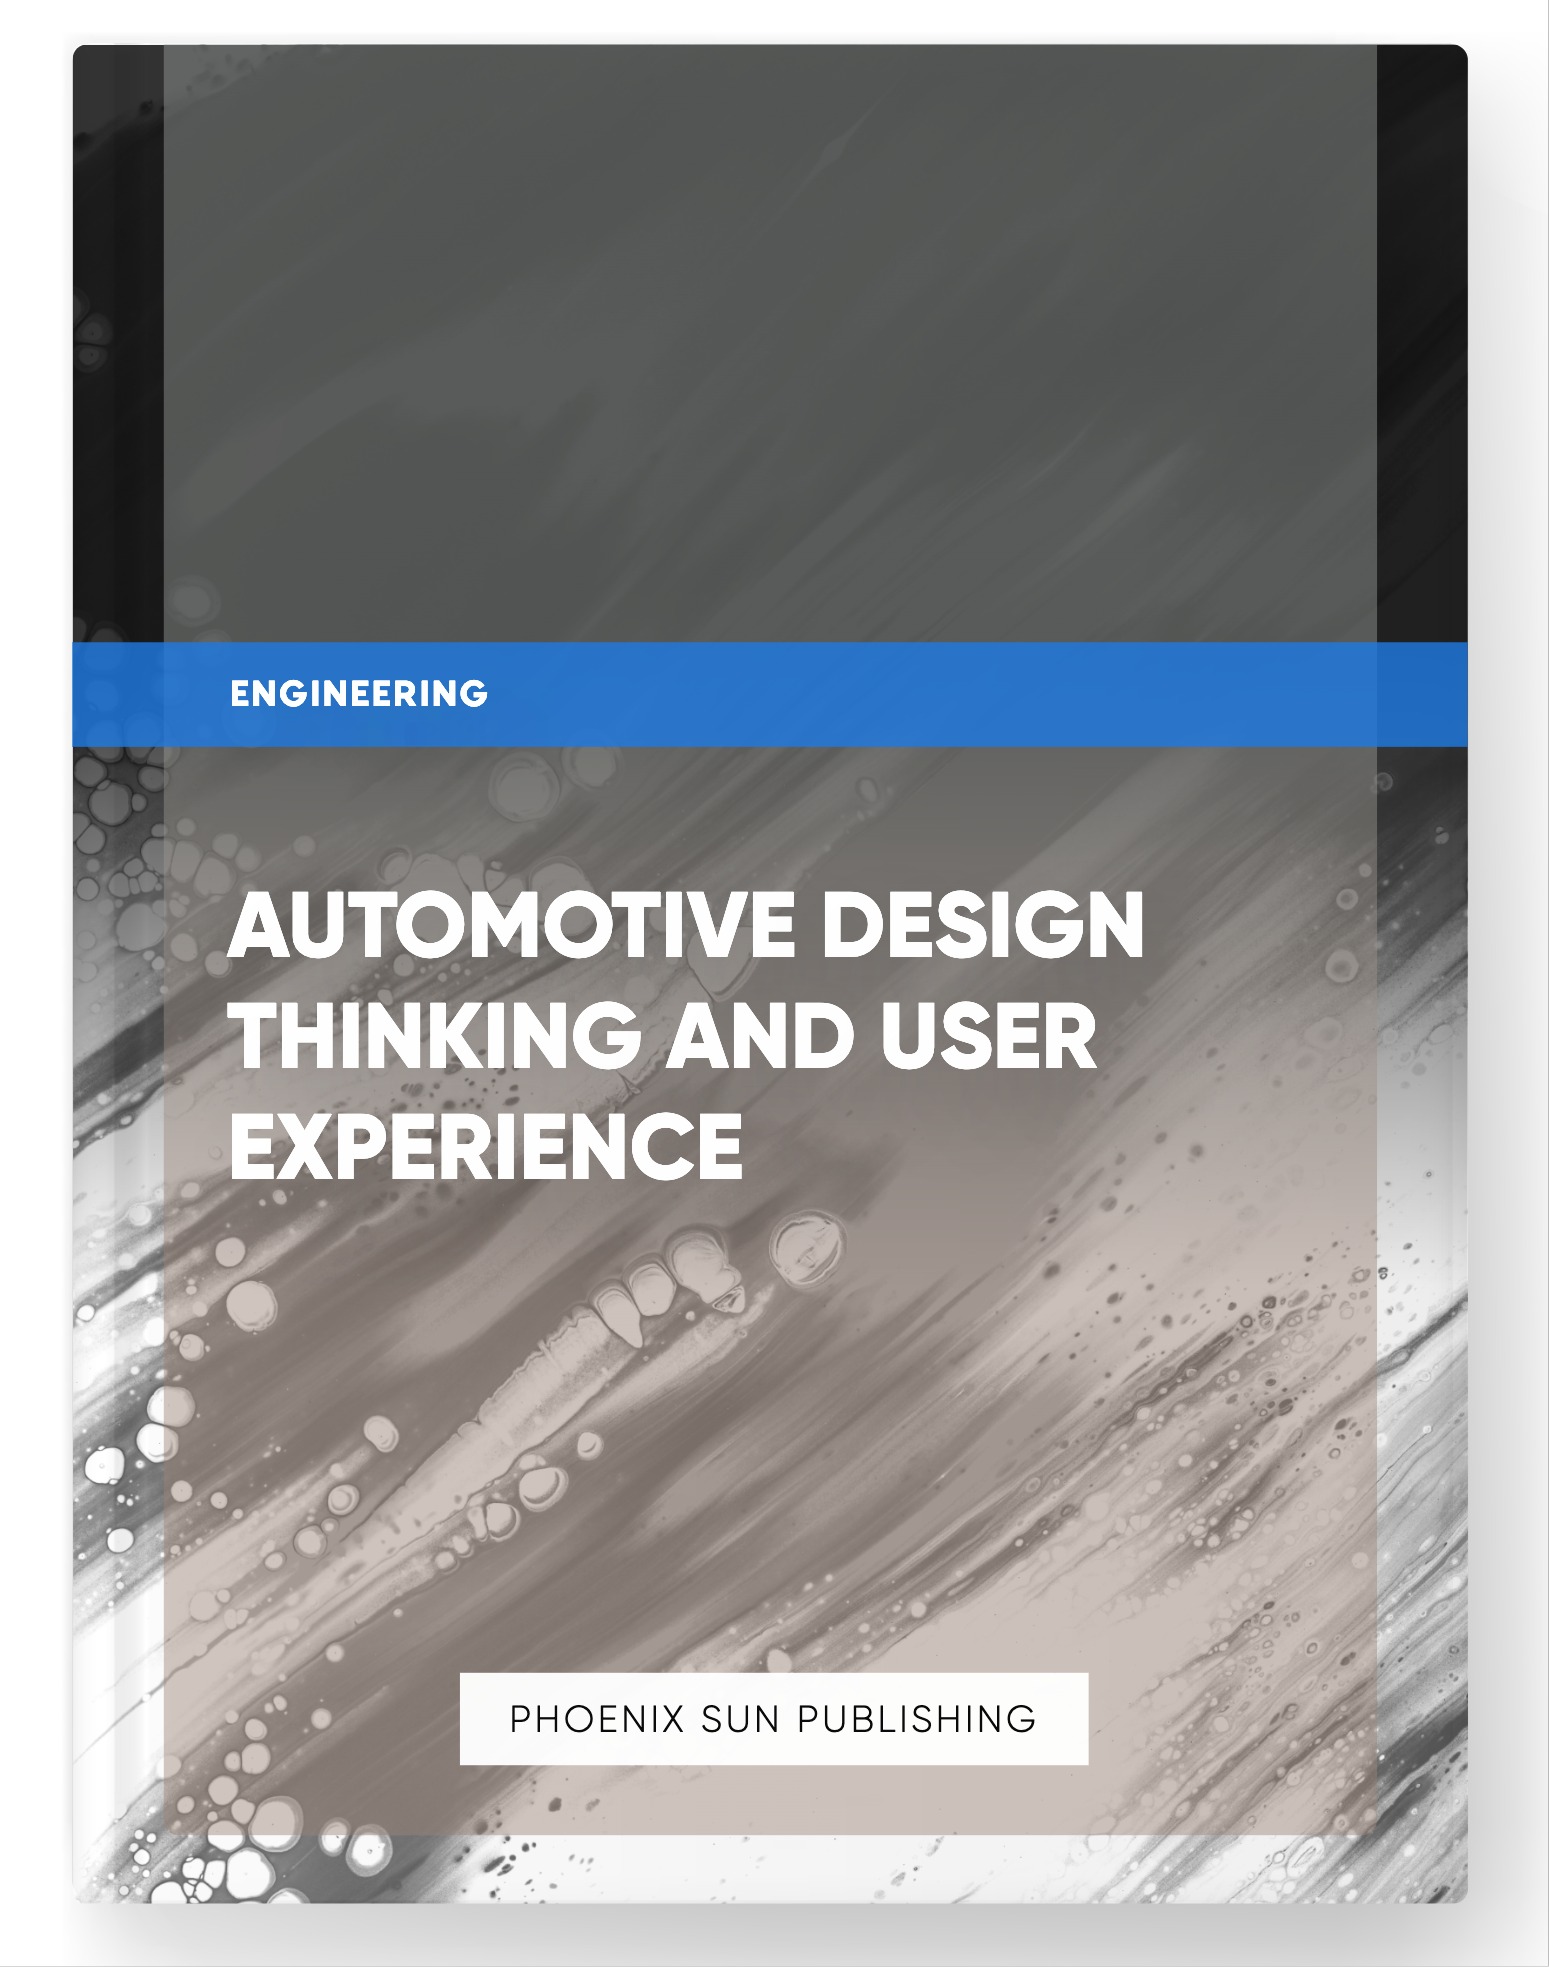 Automotive Design Thinking and User Experience